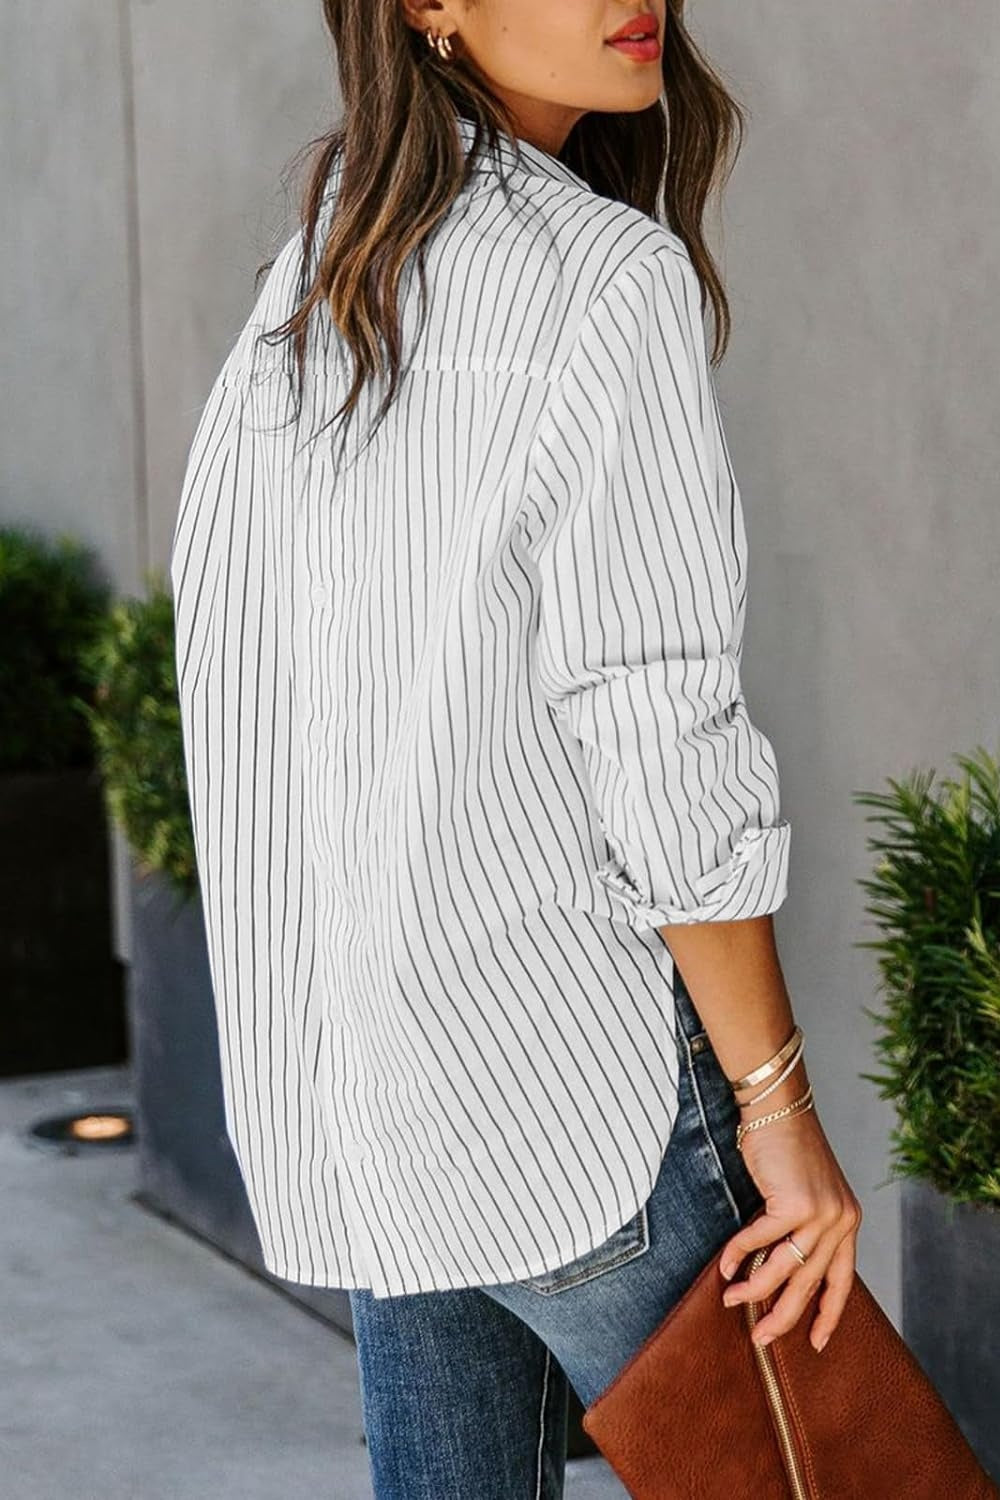 Striped Button Up Long Sleeve Shirt - Thandynie